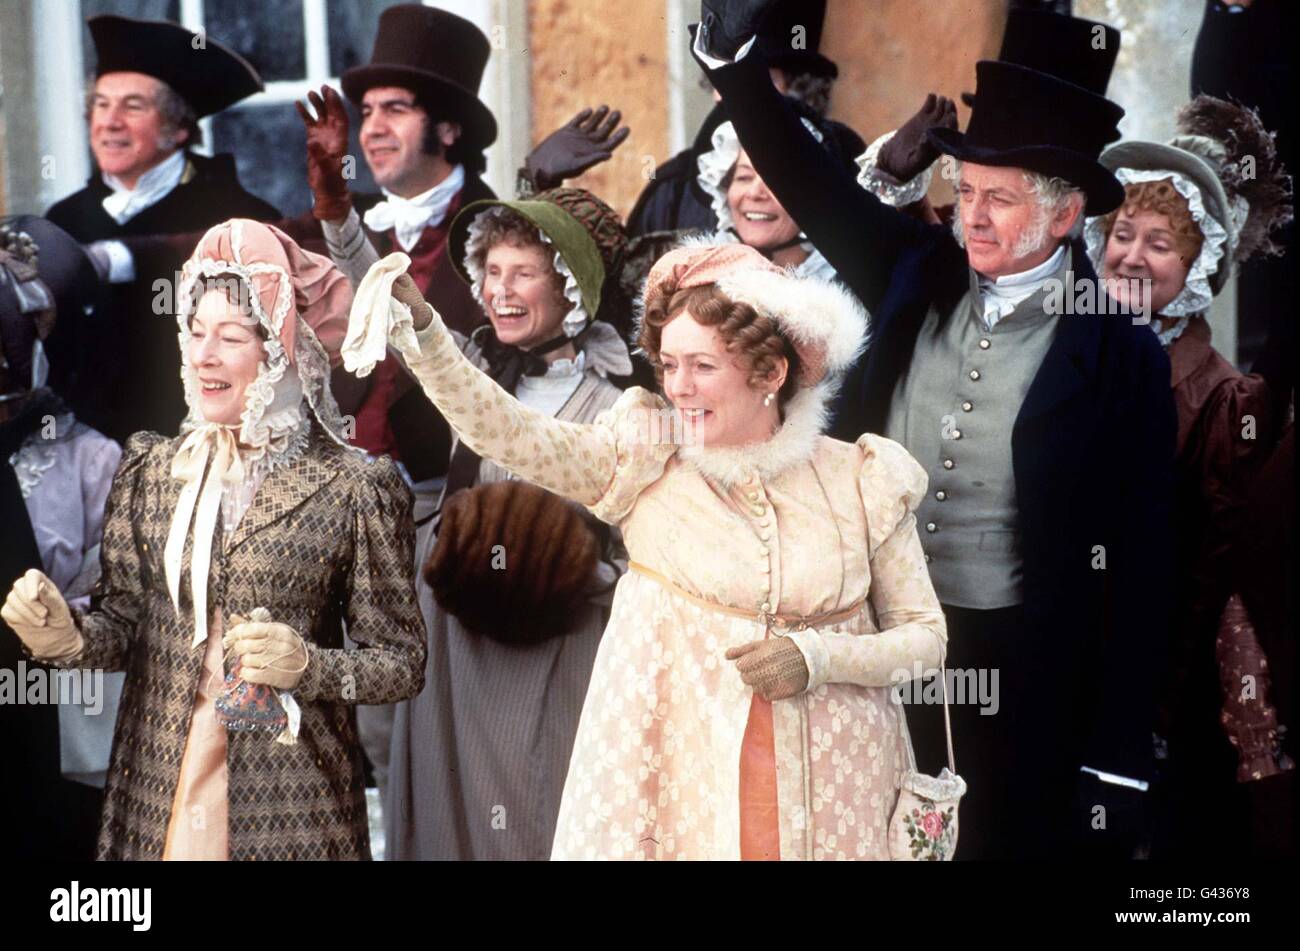 The BBC's highly acclaimed costume drama Pride and Prejudice comes to an end with the double wedding of Elizabeth and Jane to Darcy and Bingley. Picture shows Alison Steadman and Benjamin Whitlow as Mr and Mrs Bennett. PA. Stock Photo